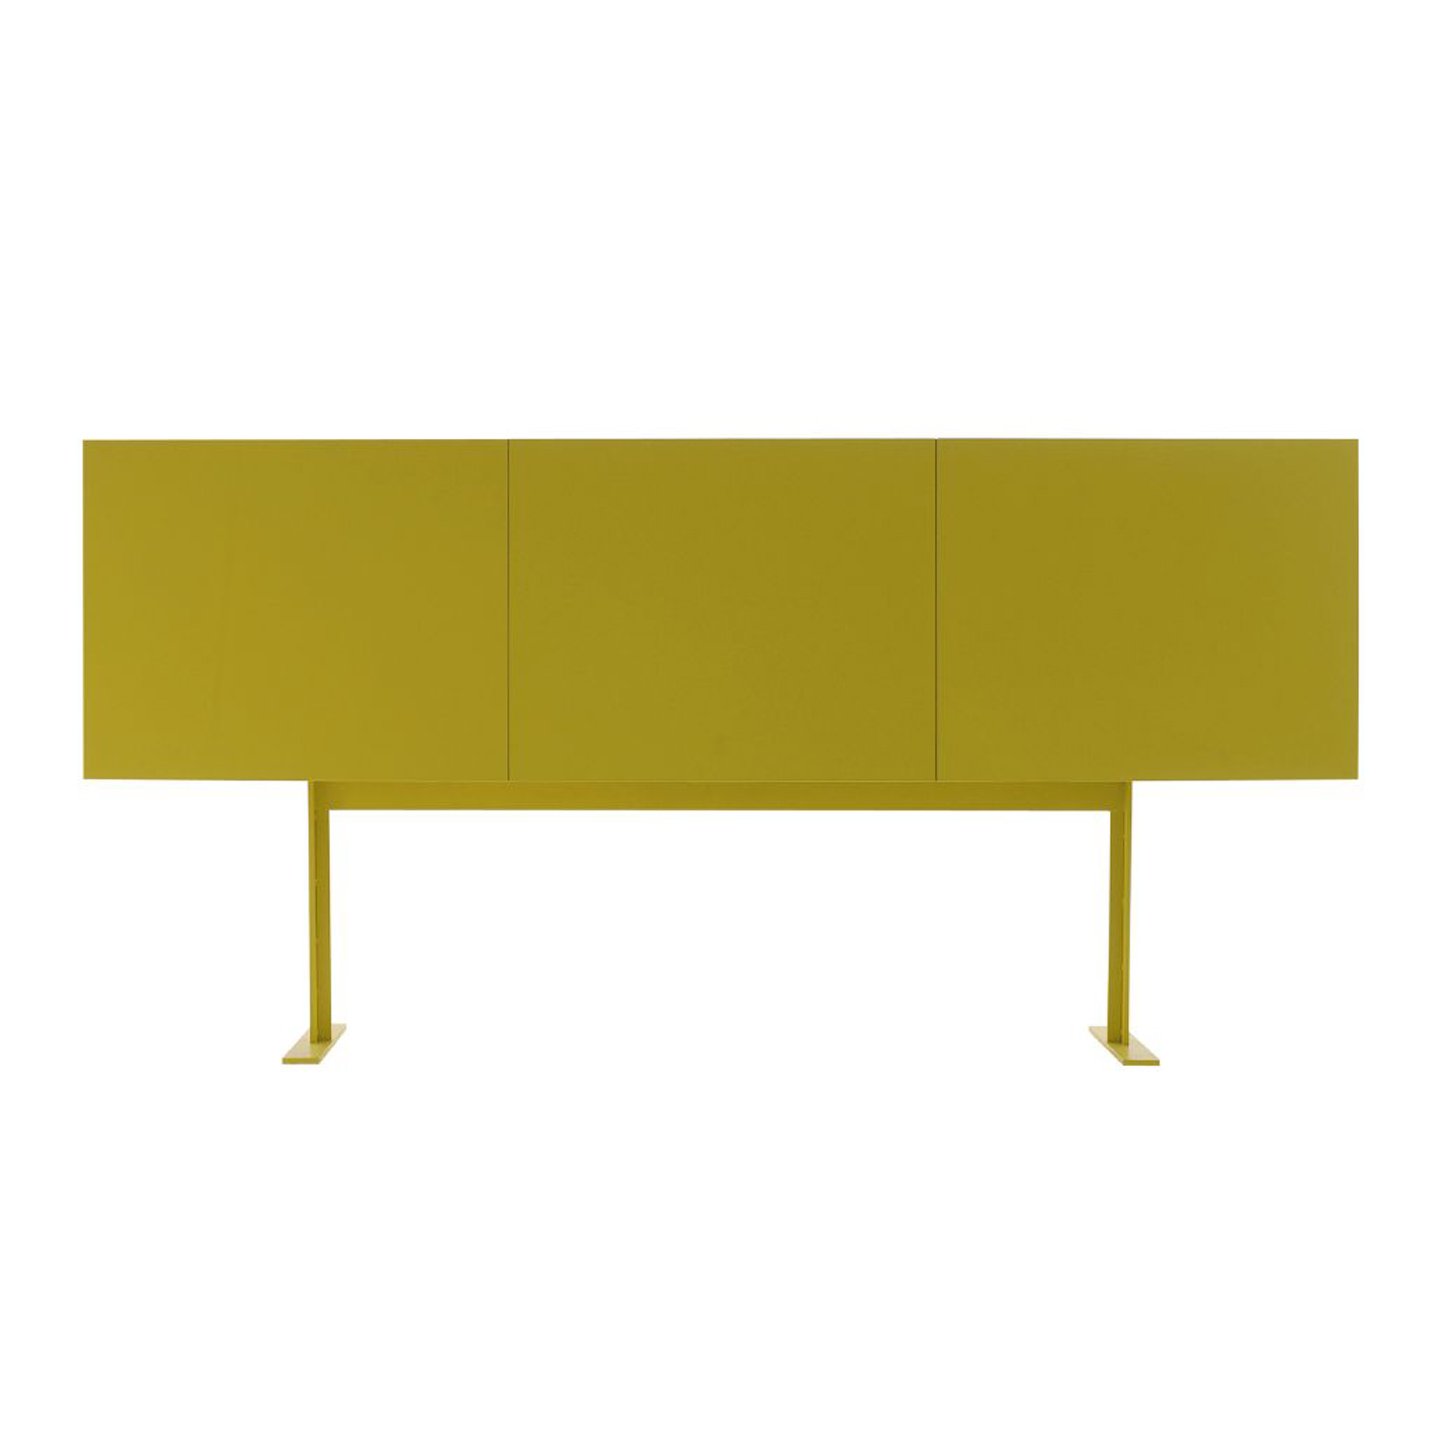 Luxor Credenza in yellow with three cabinets